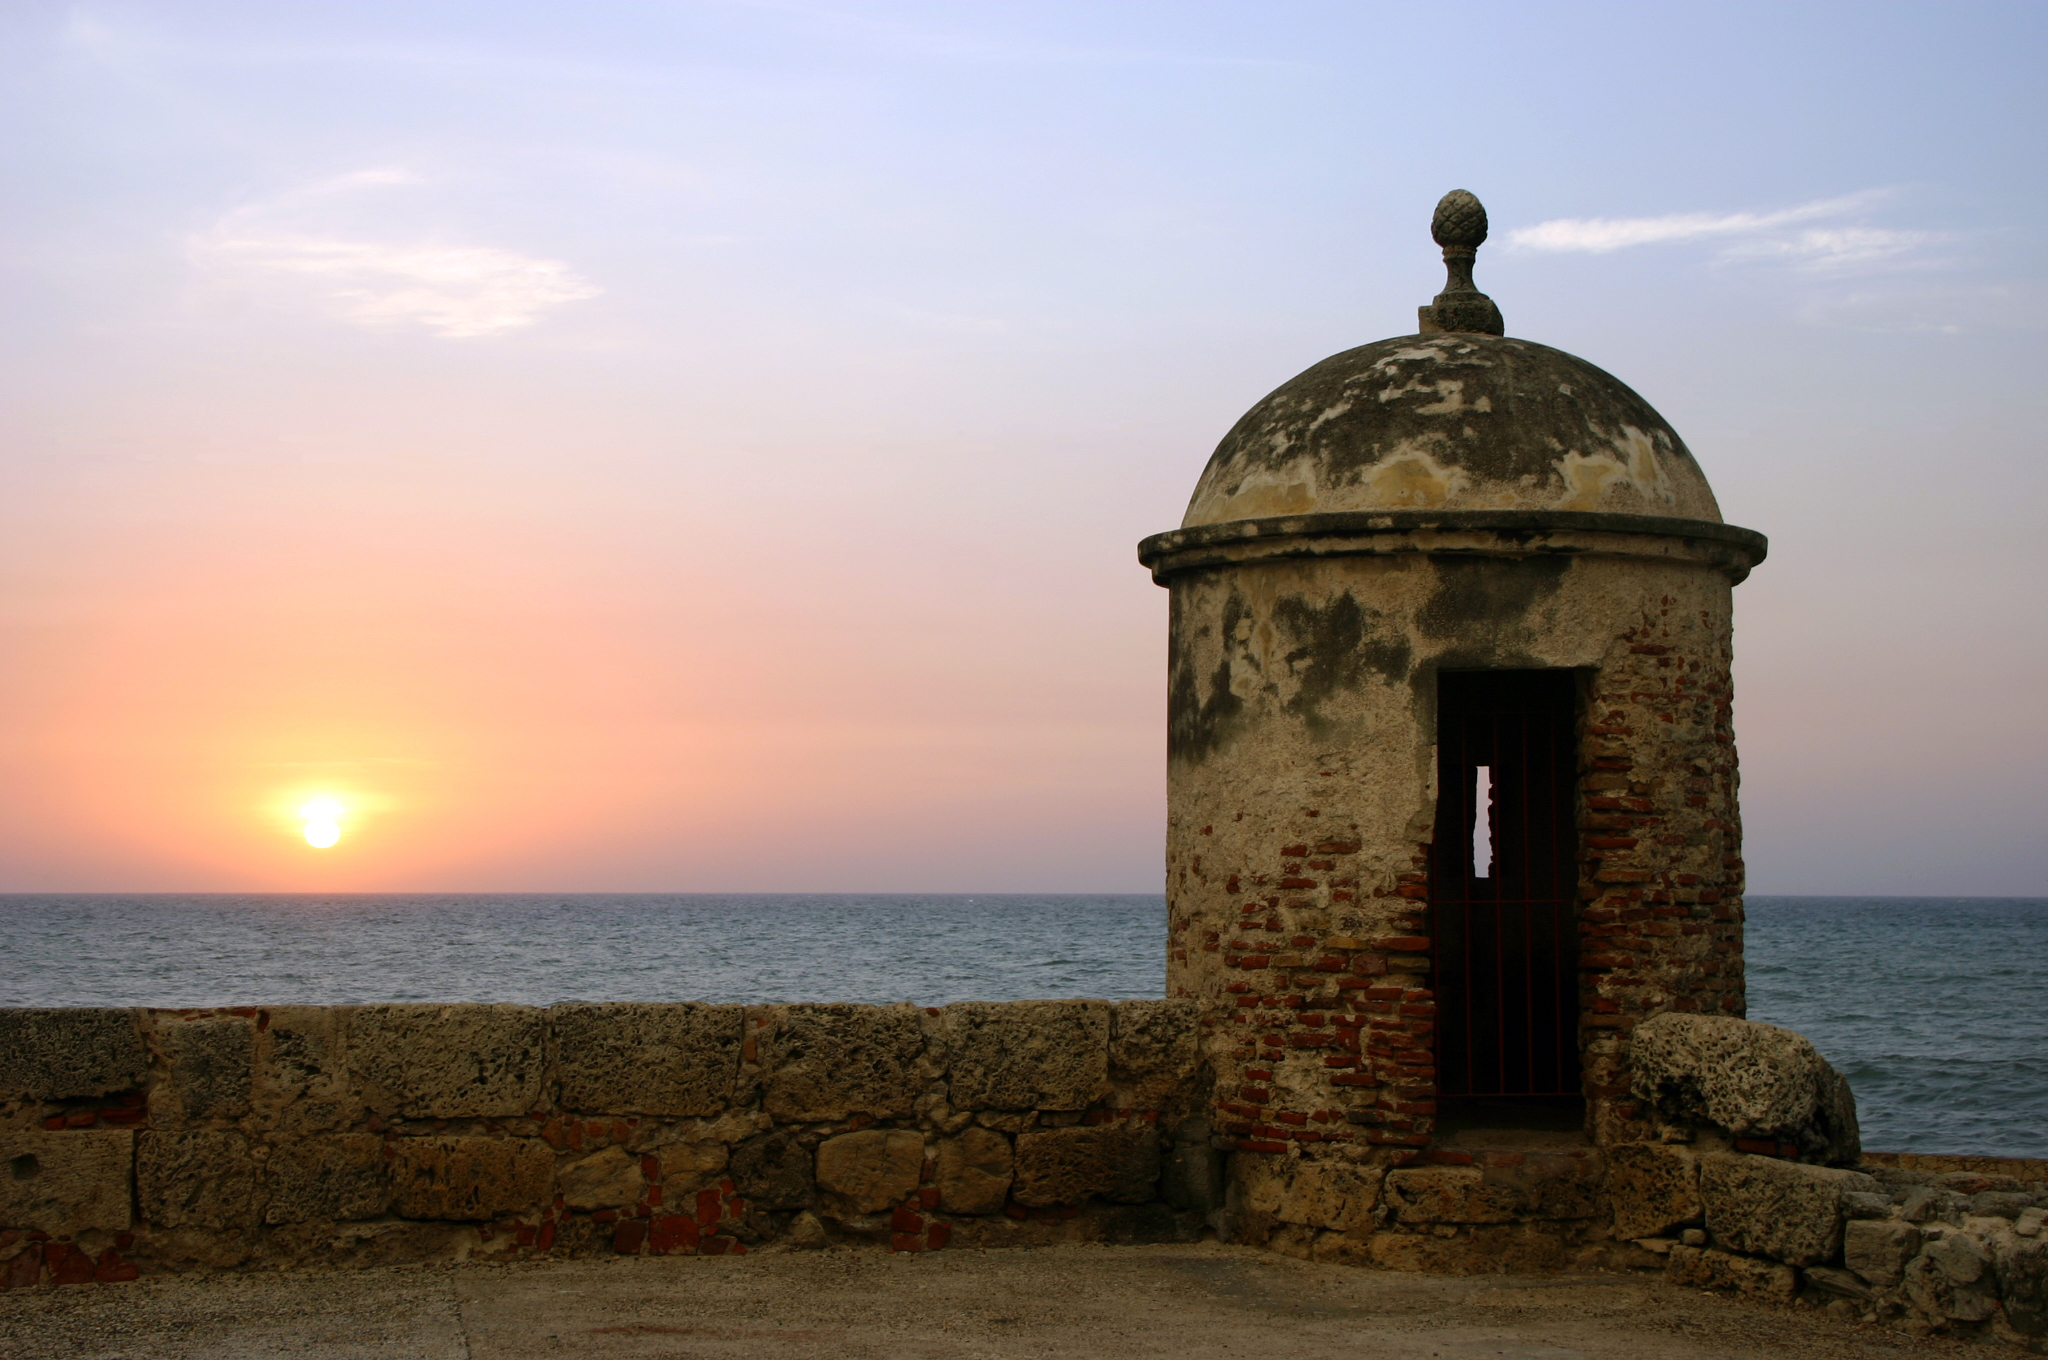 Image Sunset In Cartagena Colombia 1920x1080p HD Travel Wallpaper